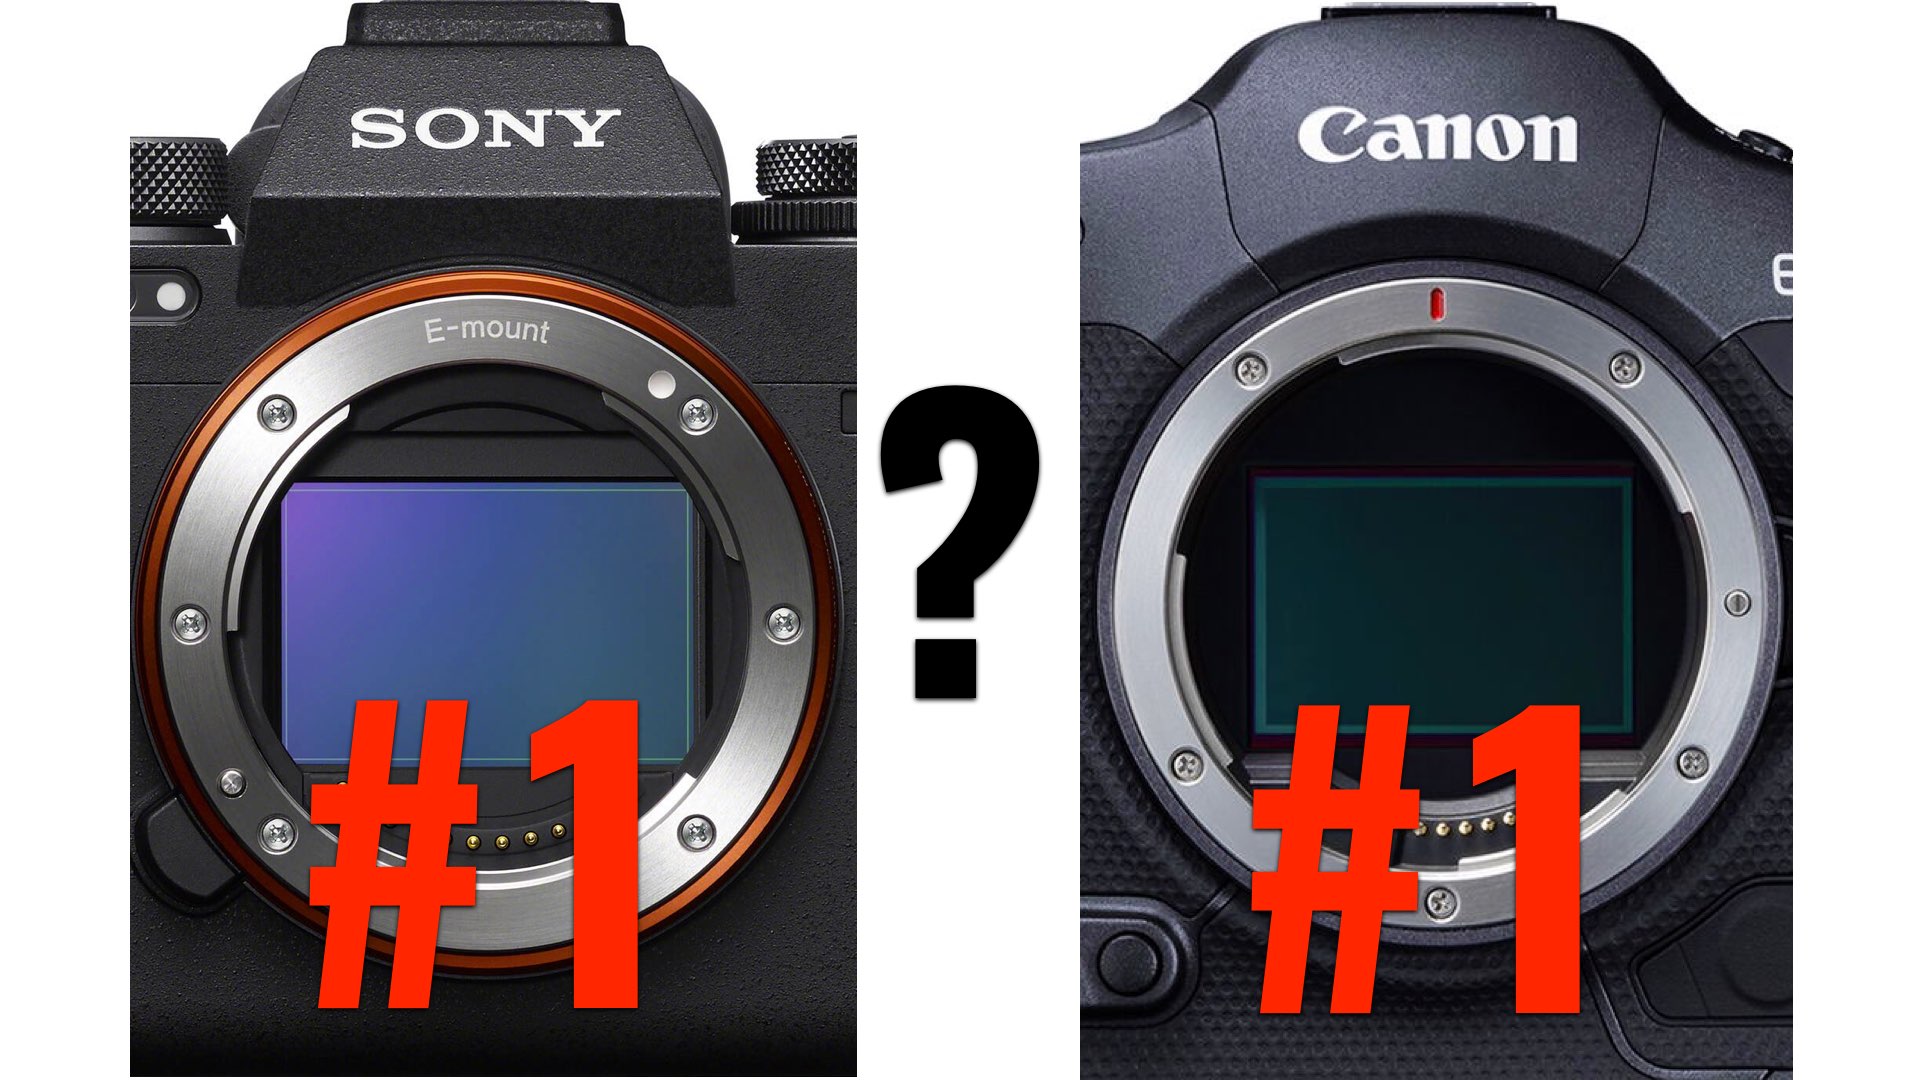 Canon Announced it was the #1 Mirrorless Camera Brand in 2021, Just Like Sony. Which is right?